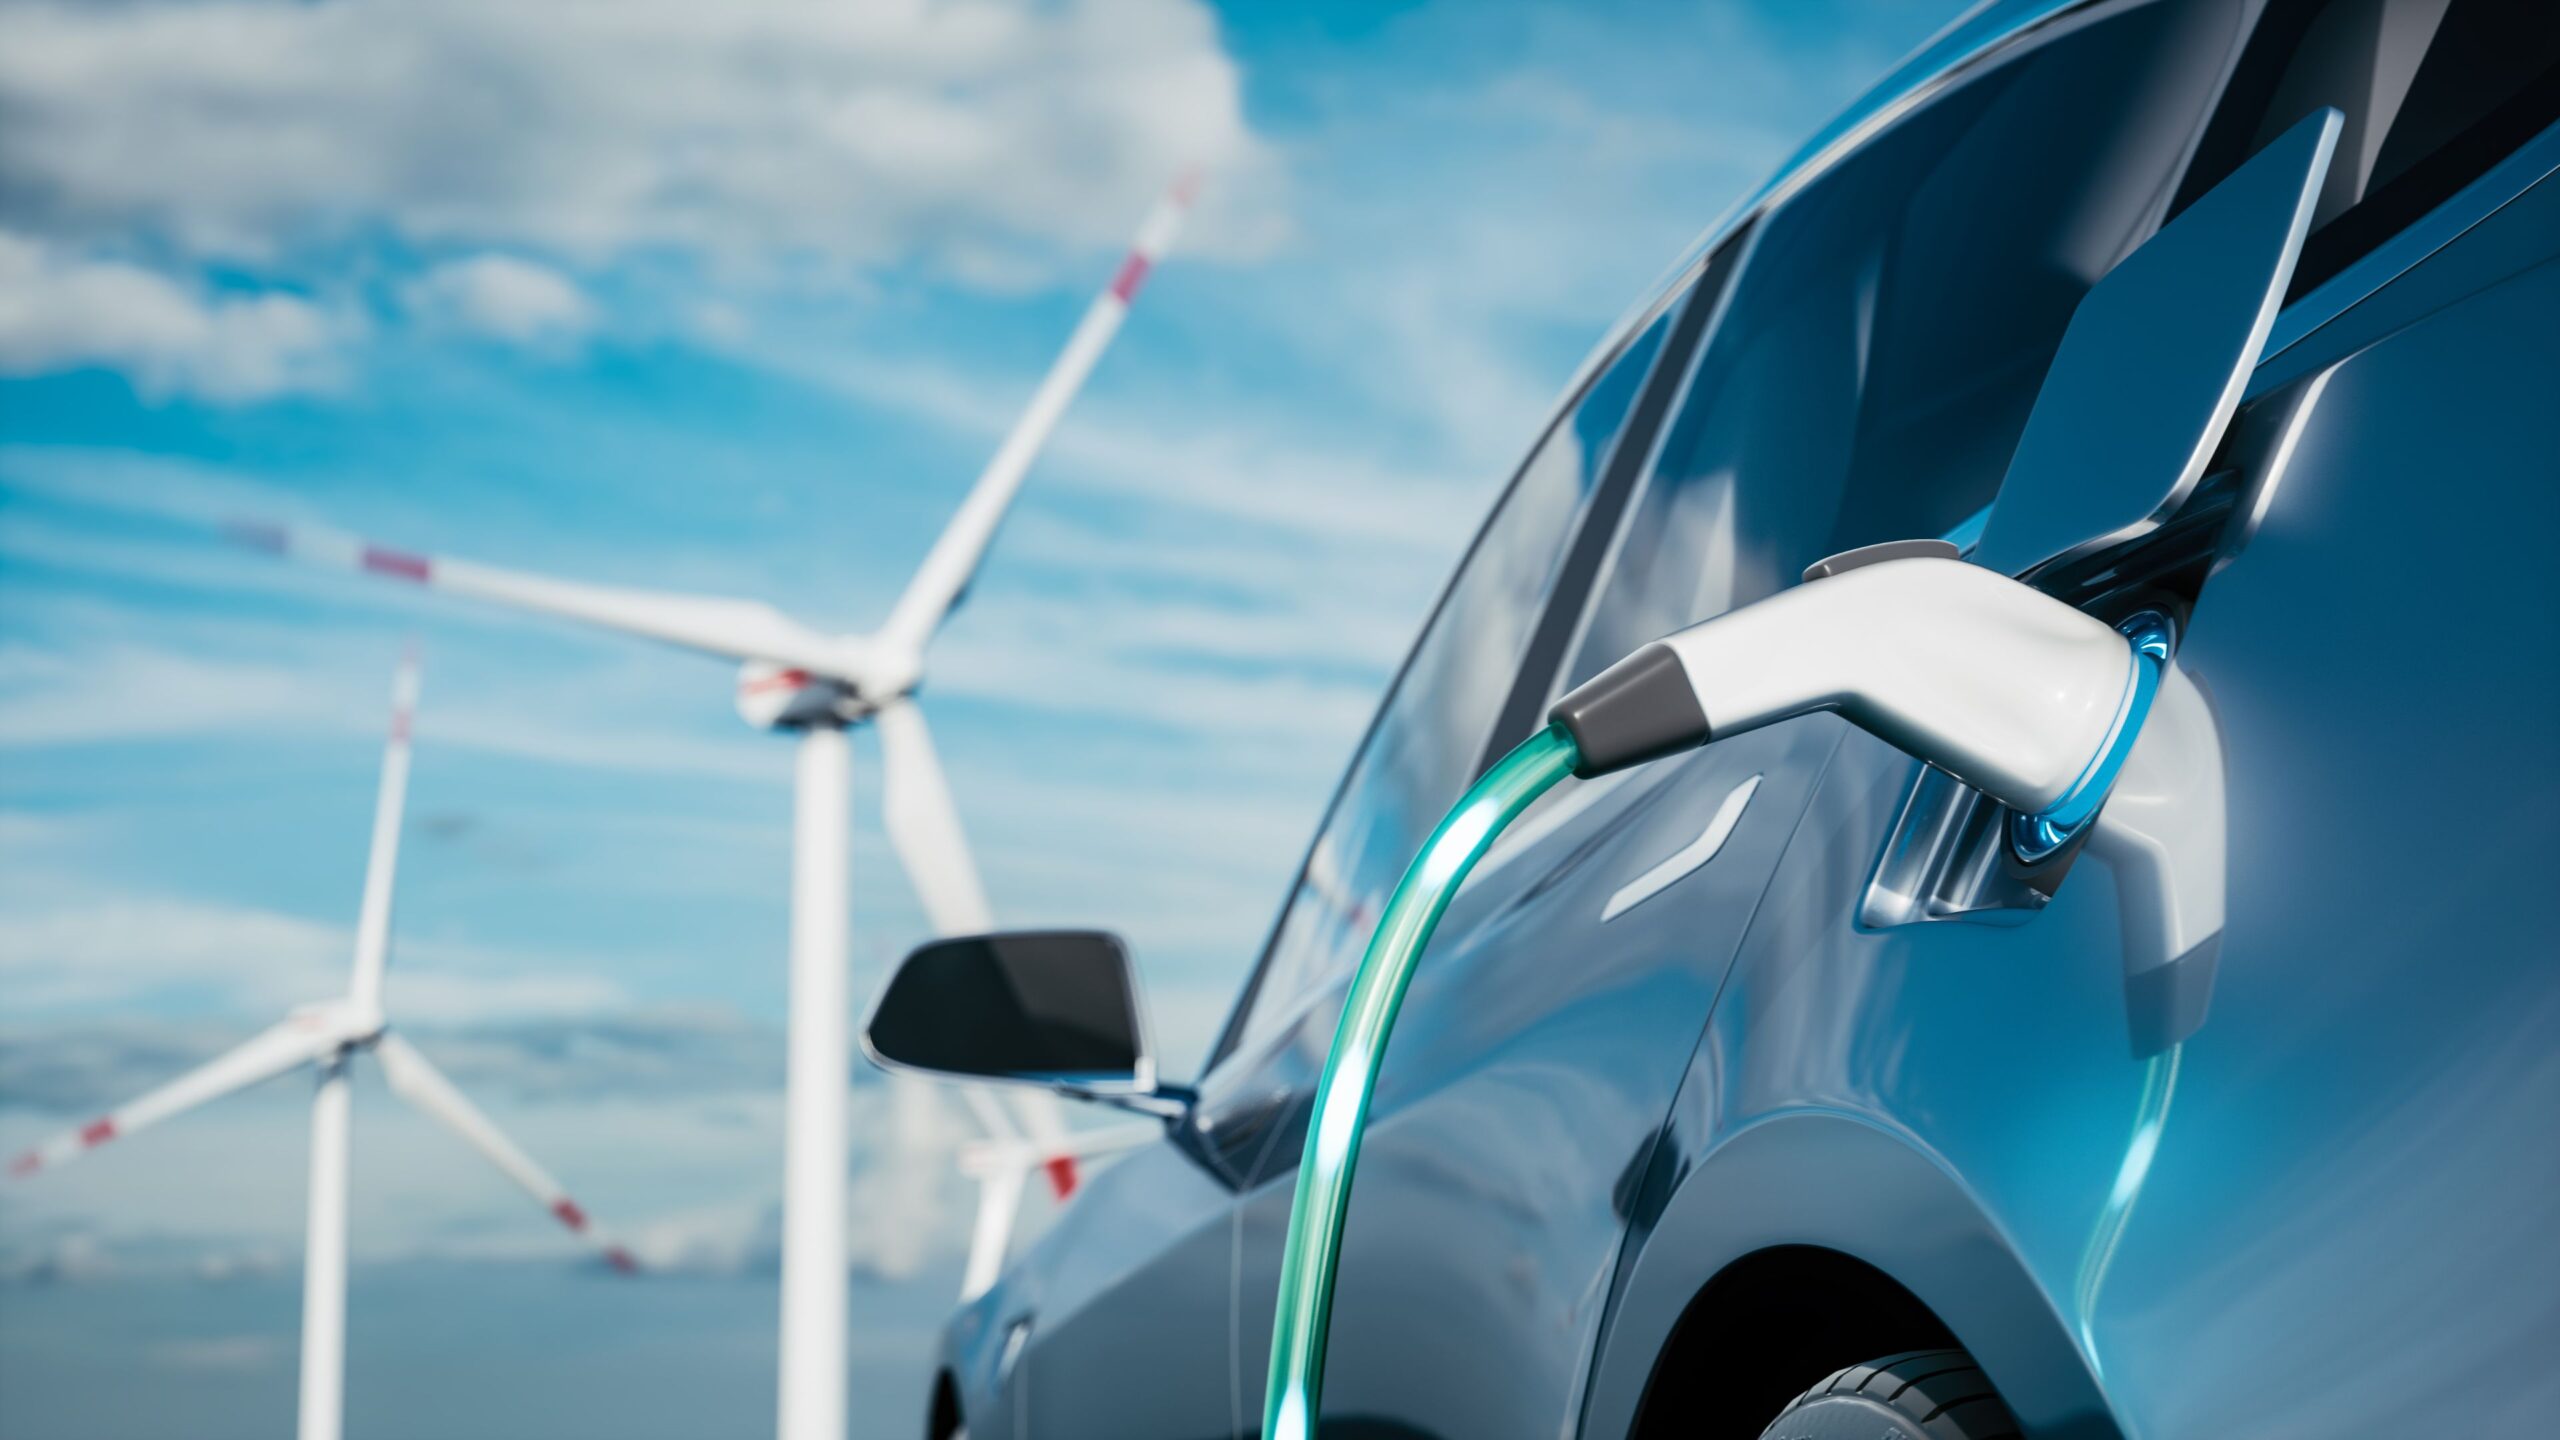 The Rise of Electric Vehicles